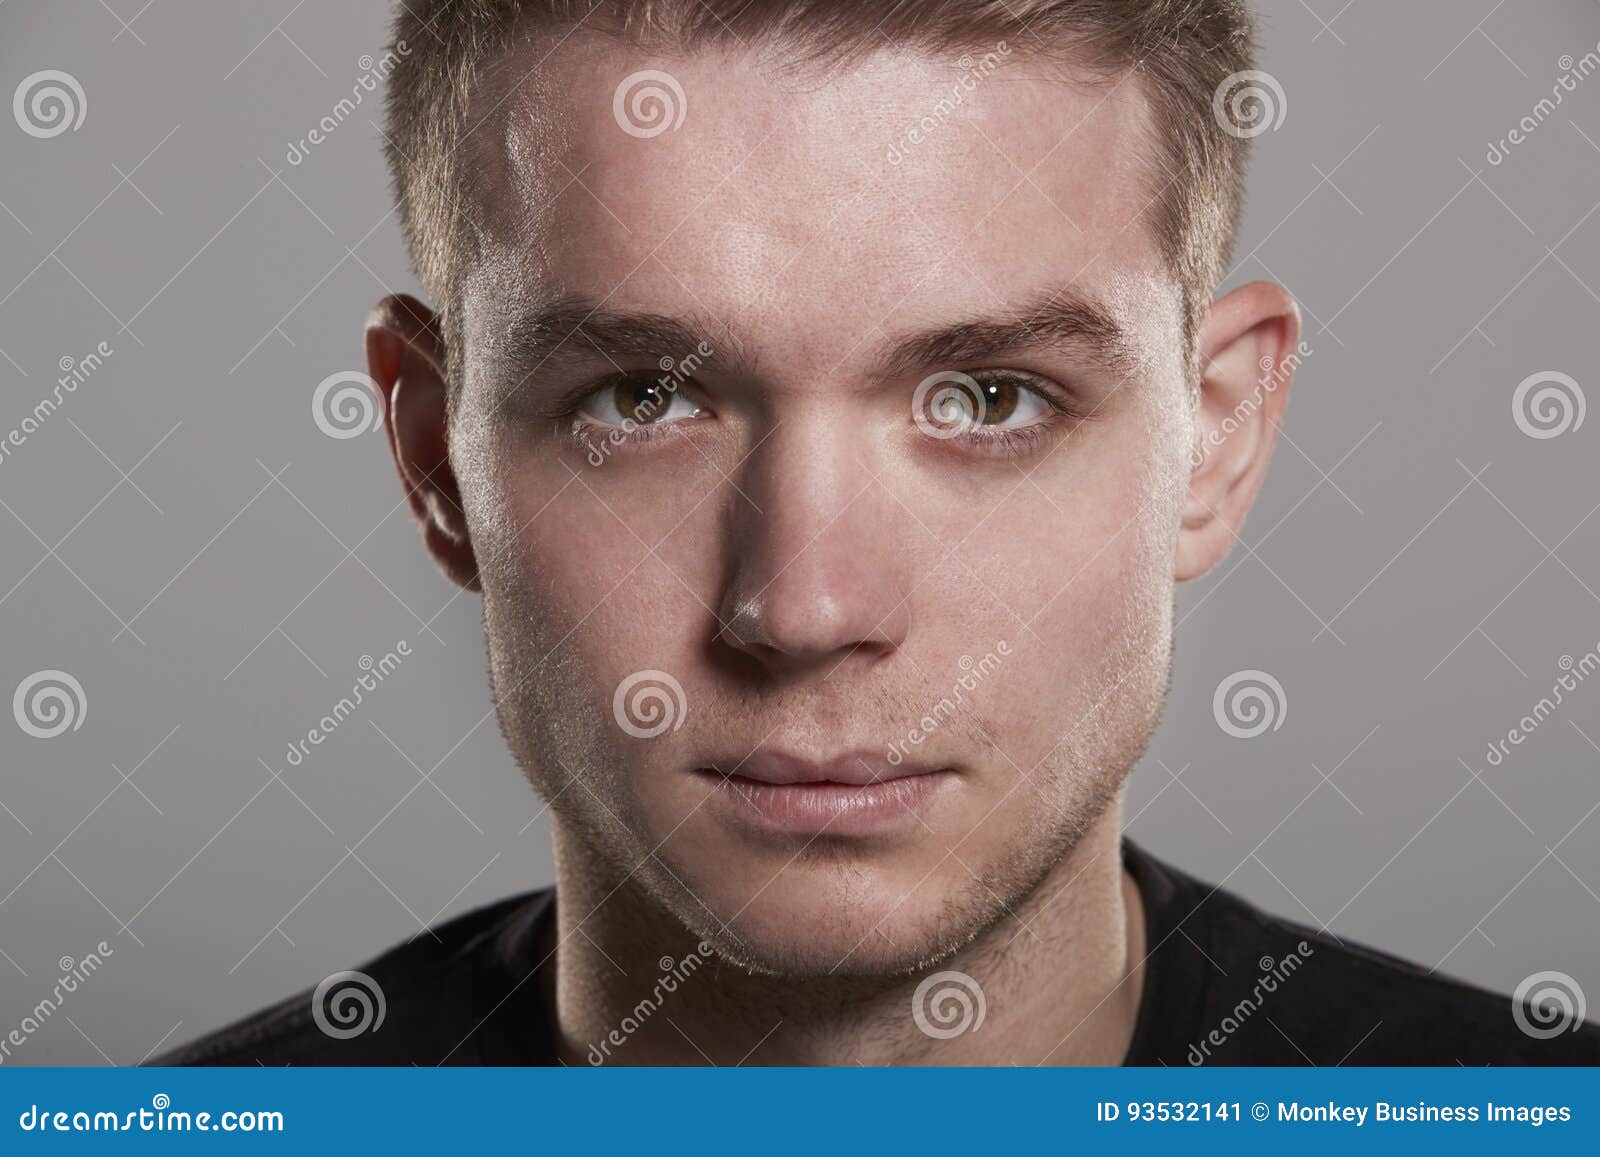 Young White Man Looking To Camera, Close Up Head Shot Stock Image ...